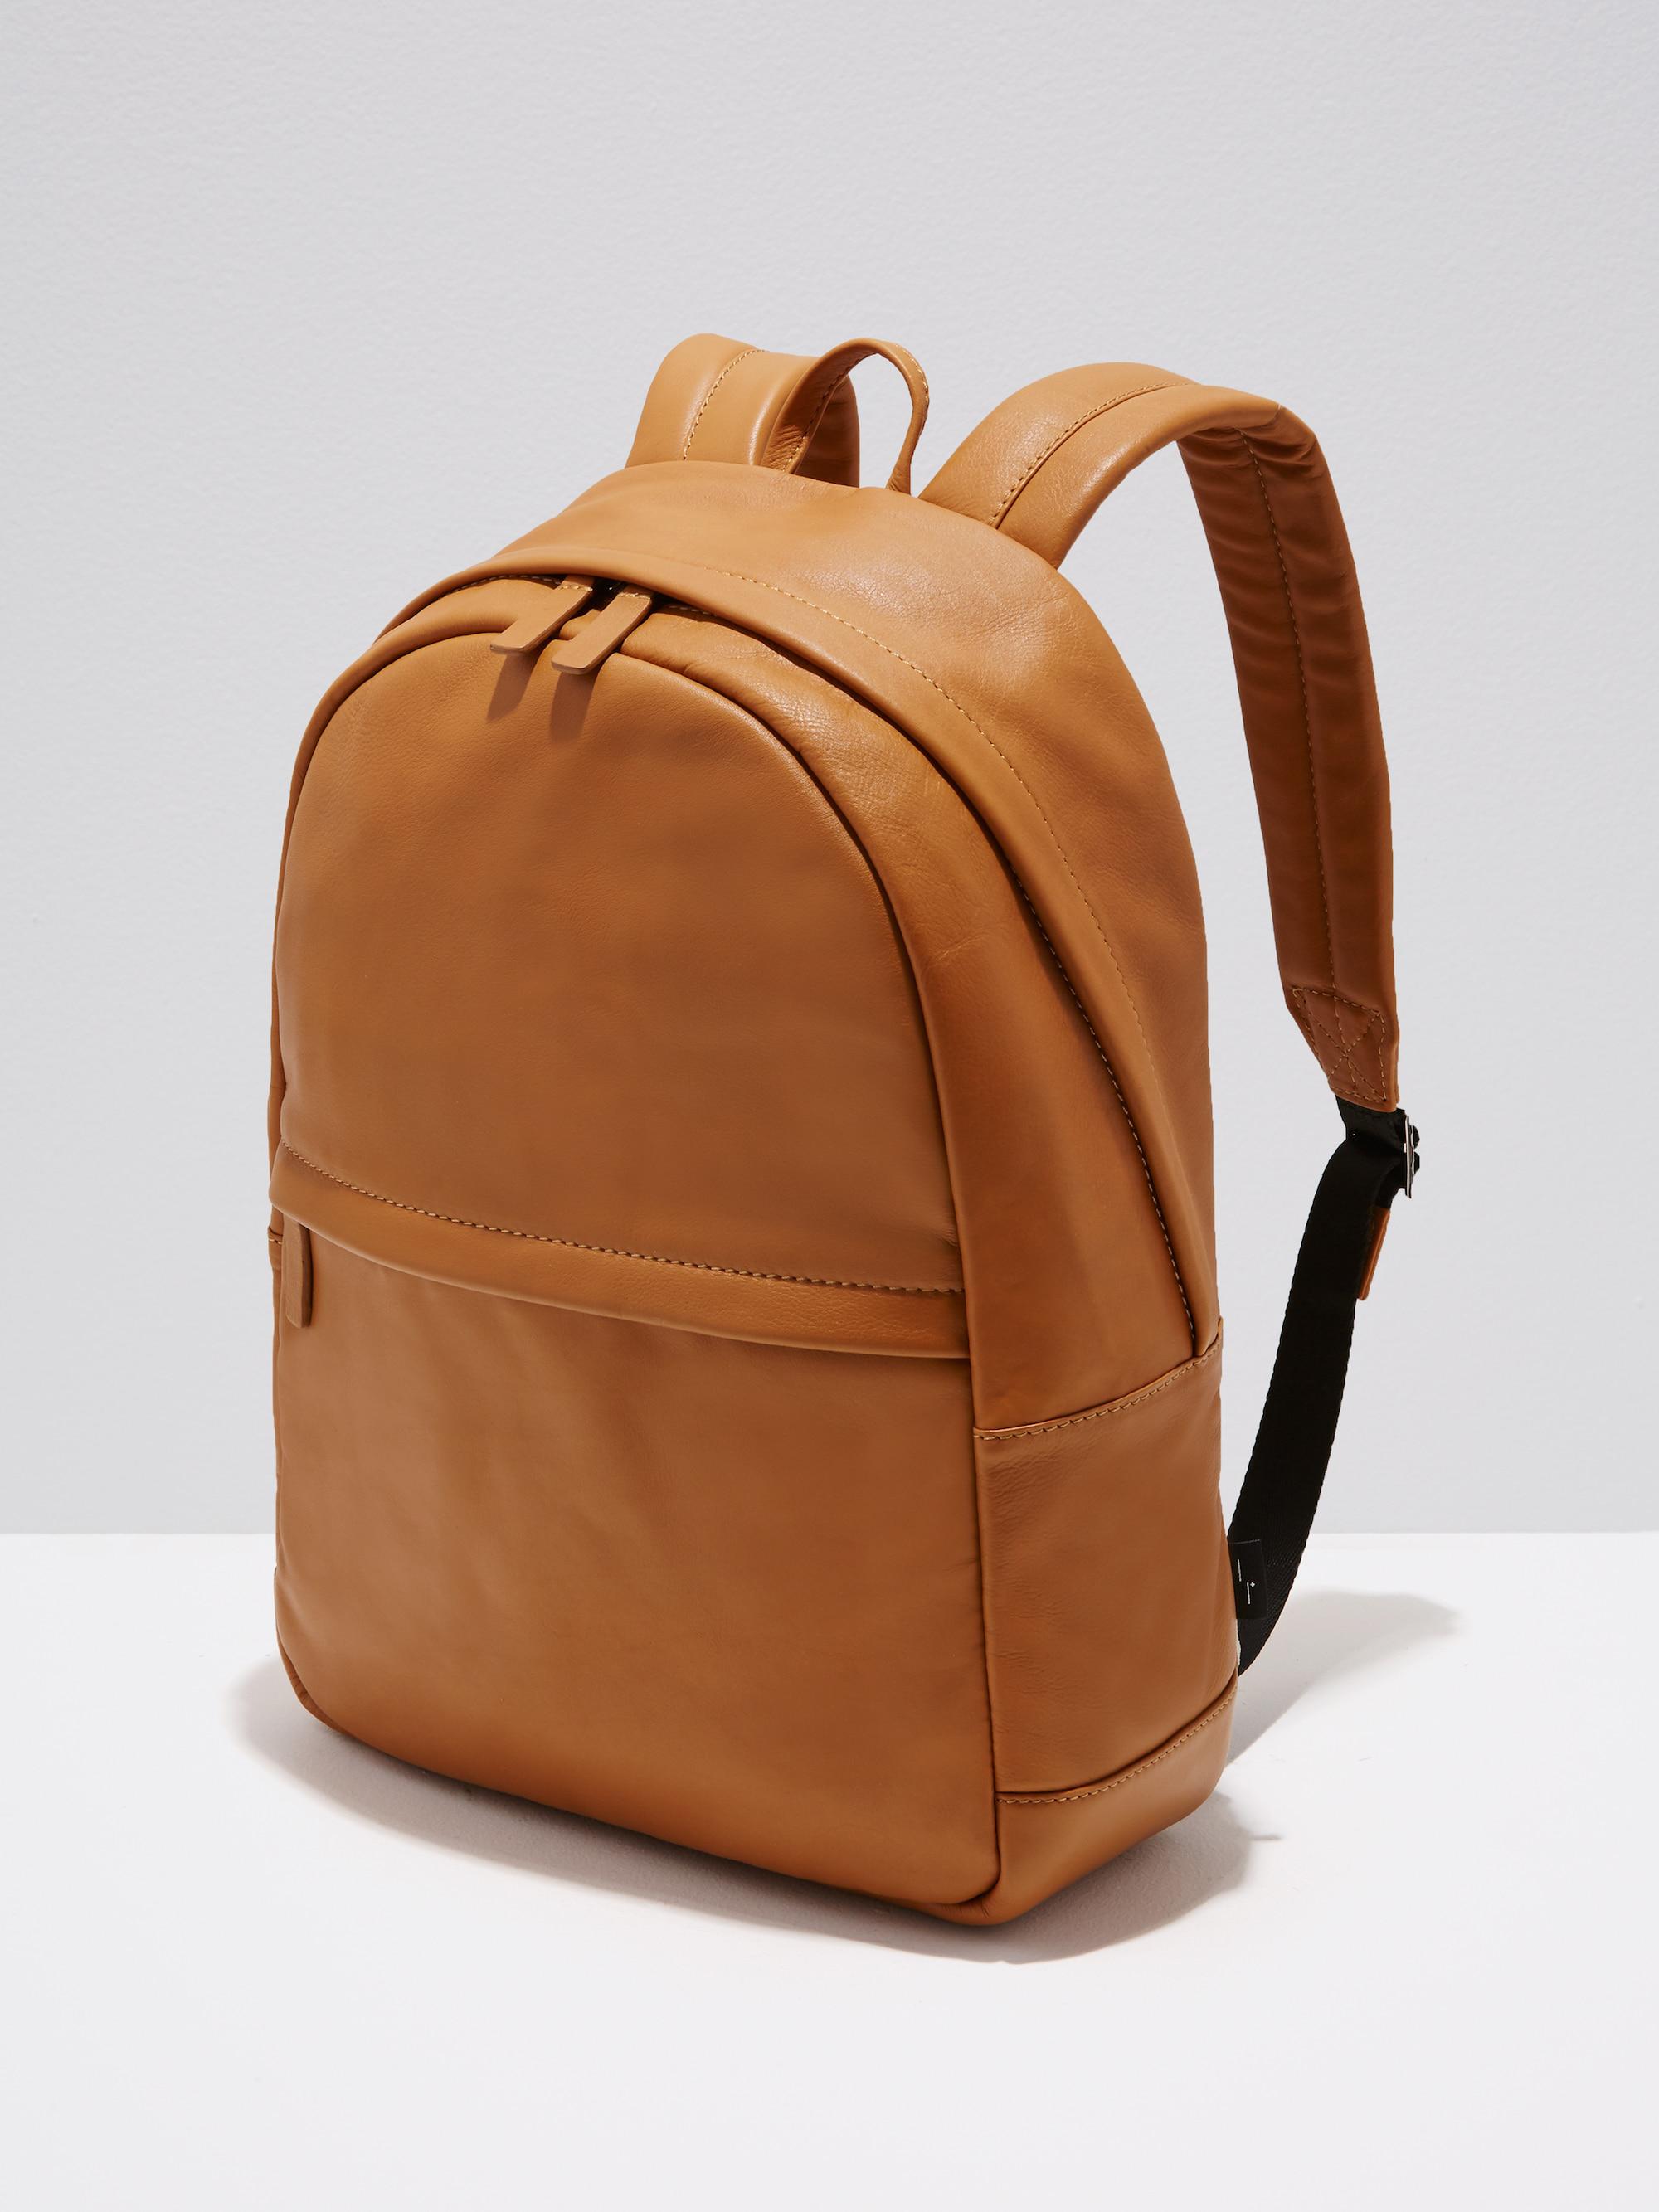 Frank And Oak The Boulevard Leather Backpack In Natural for Men - Lyst